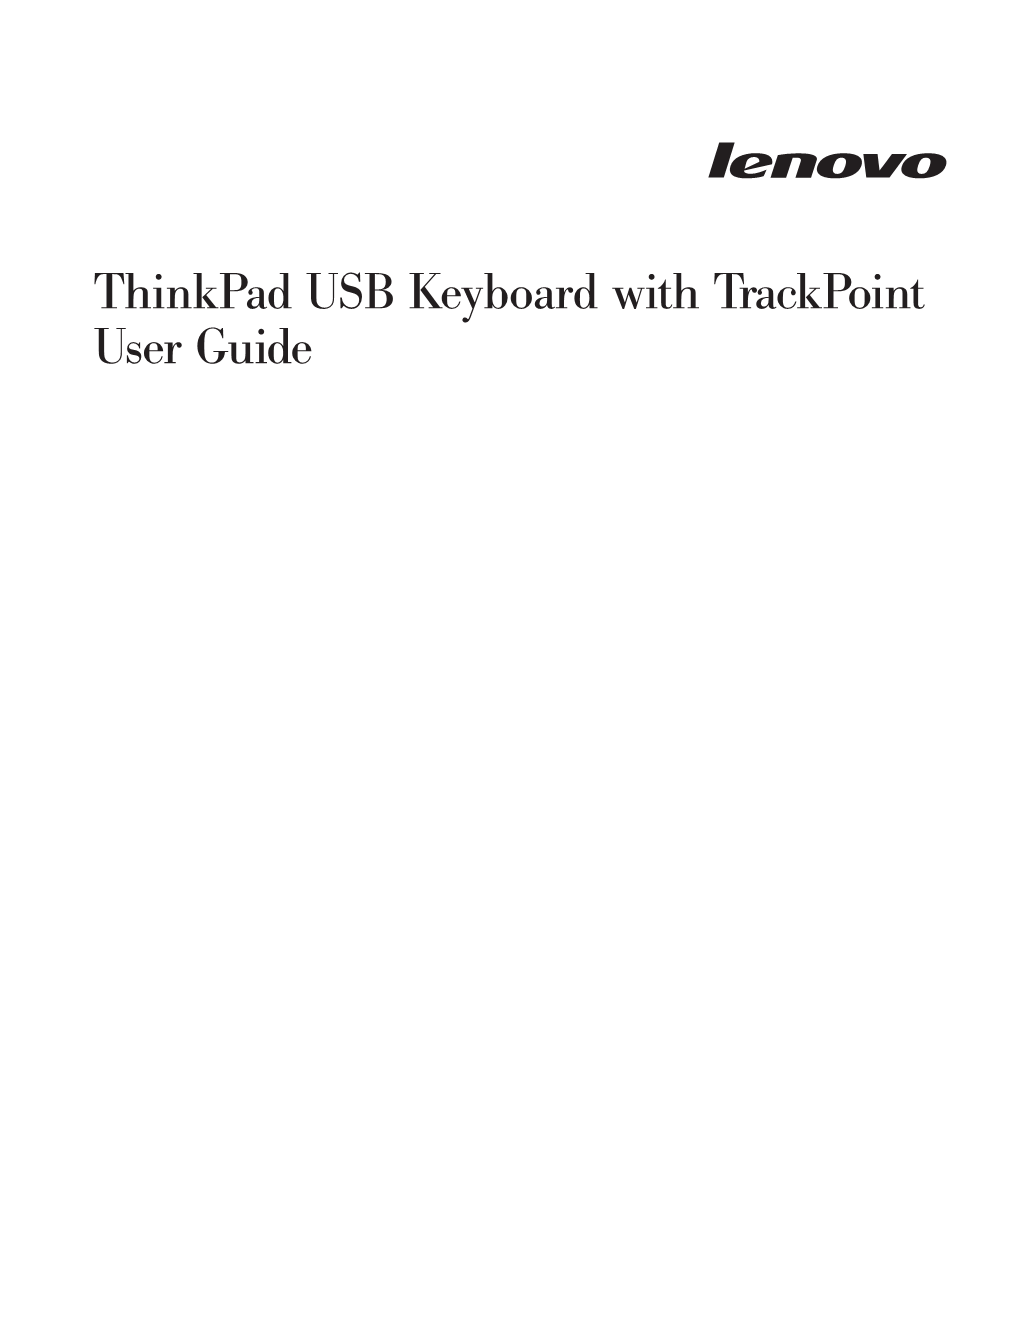 Thinkpad USB Keyboard with Trackpoint User Guide